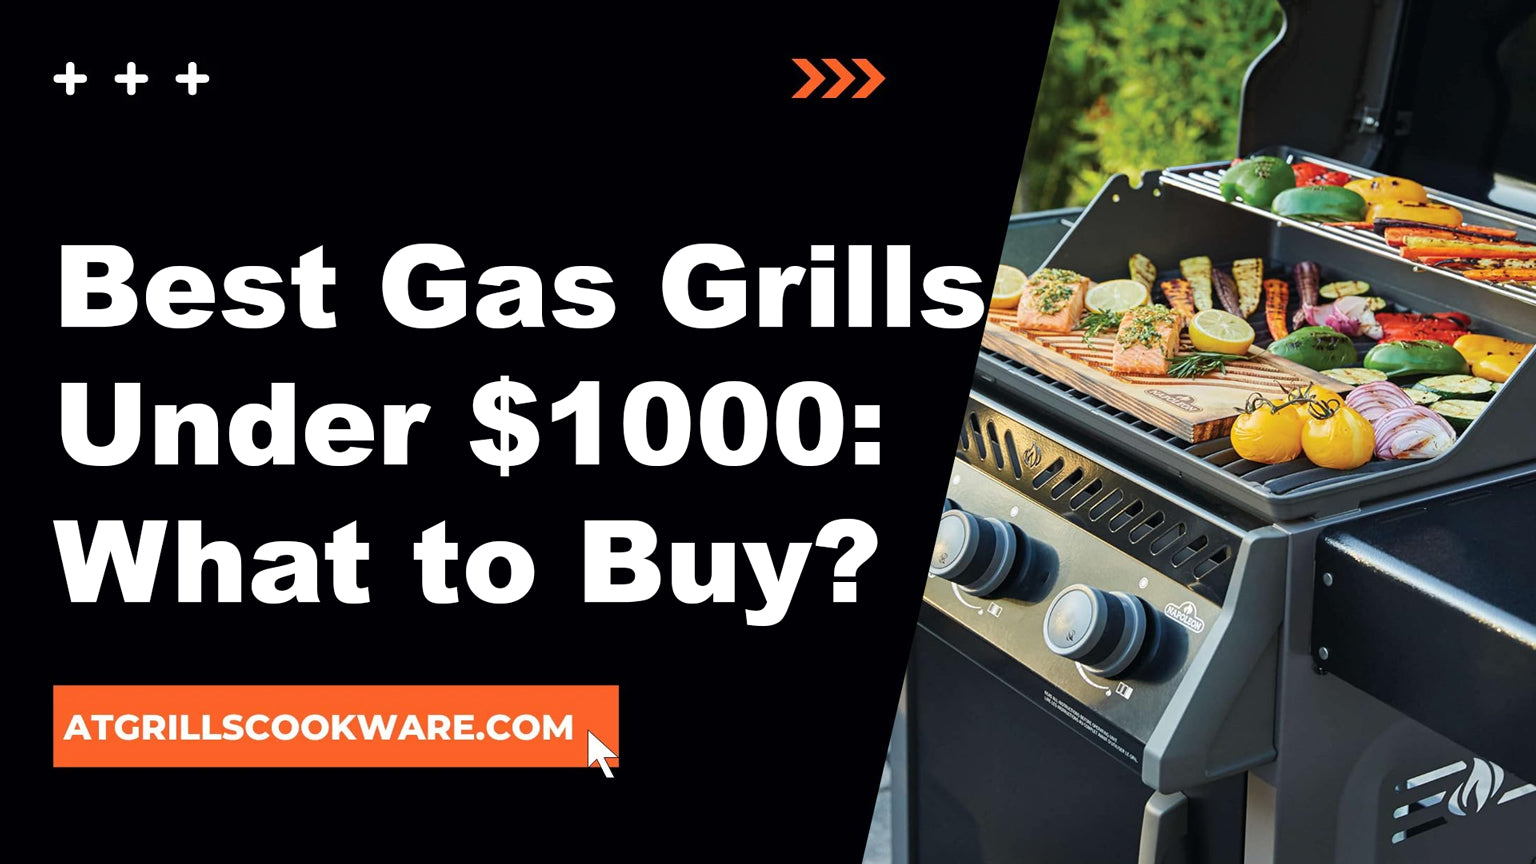 Best Gas Grills Under $1000: What to Buy?